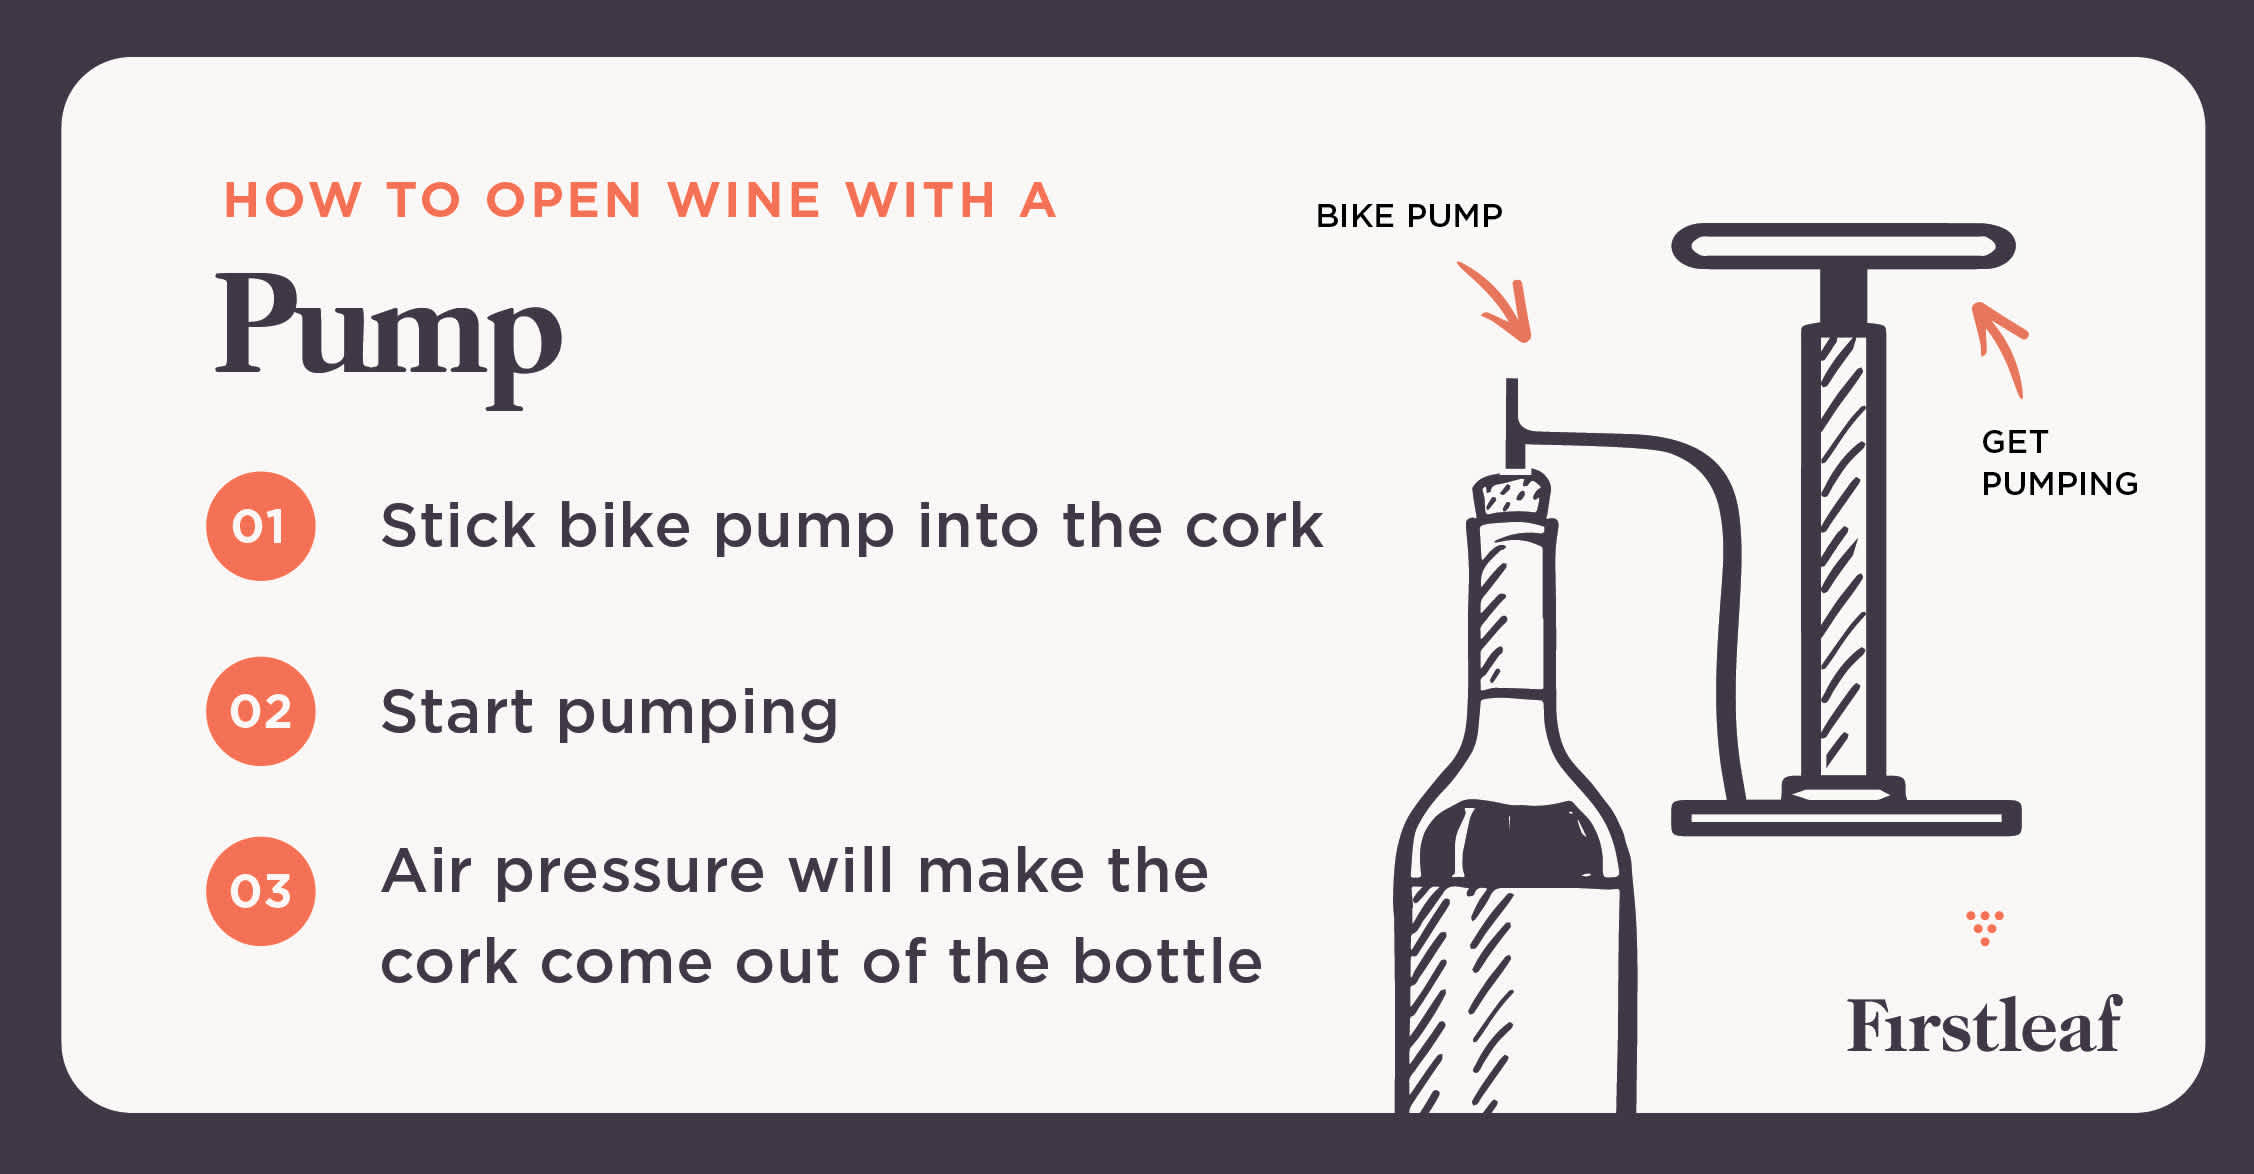 How to Open Wine with a Bicycle Pump